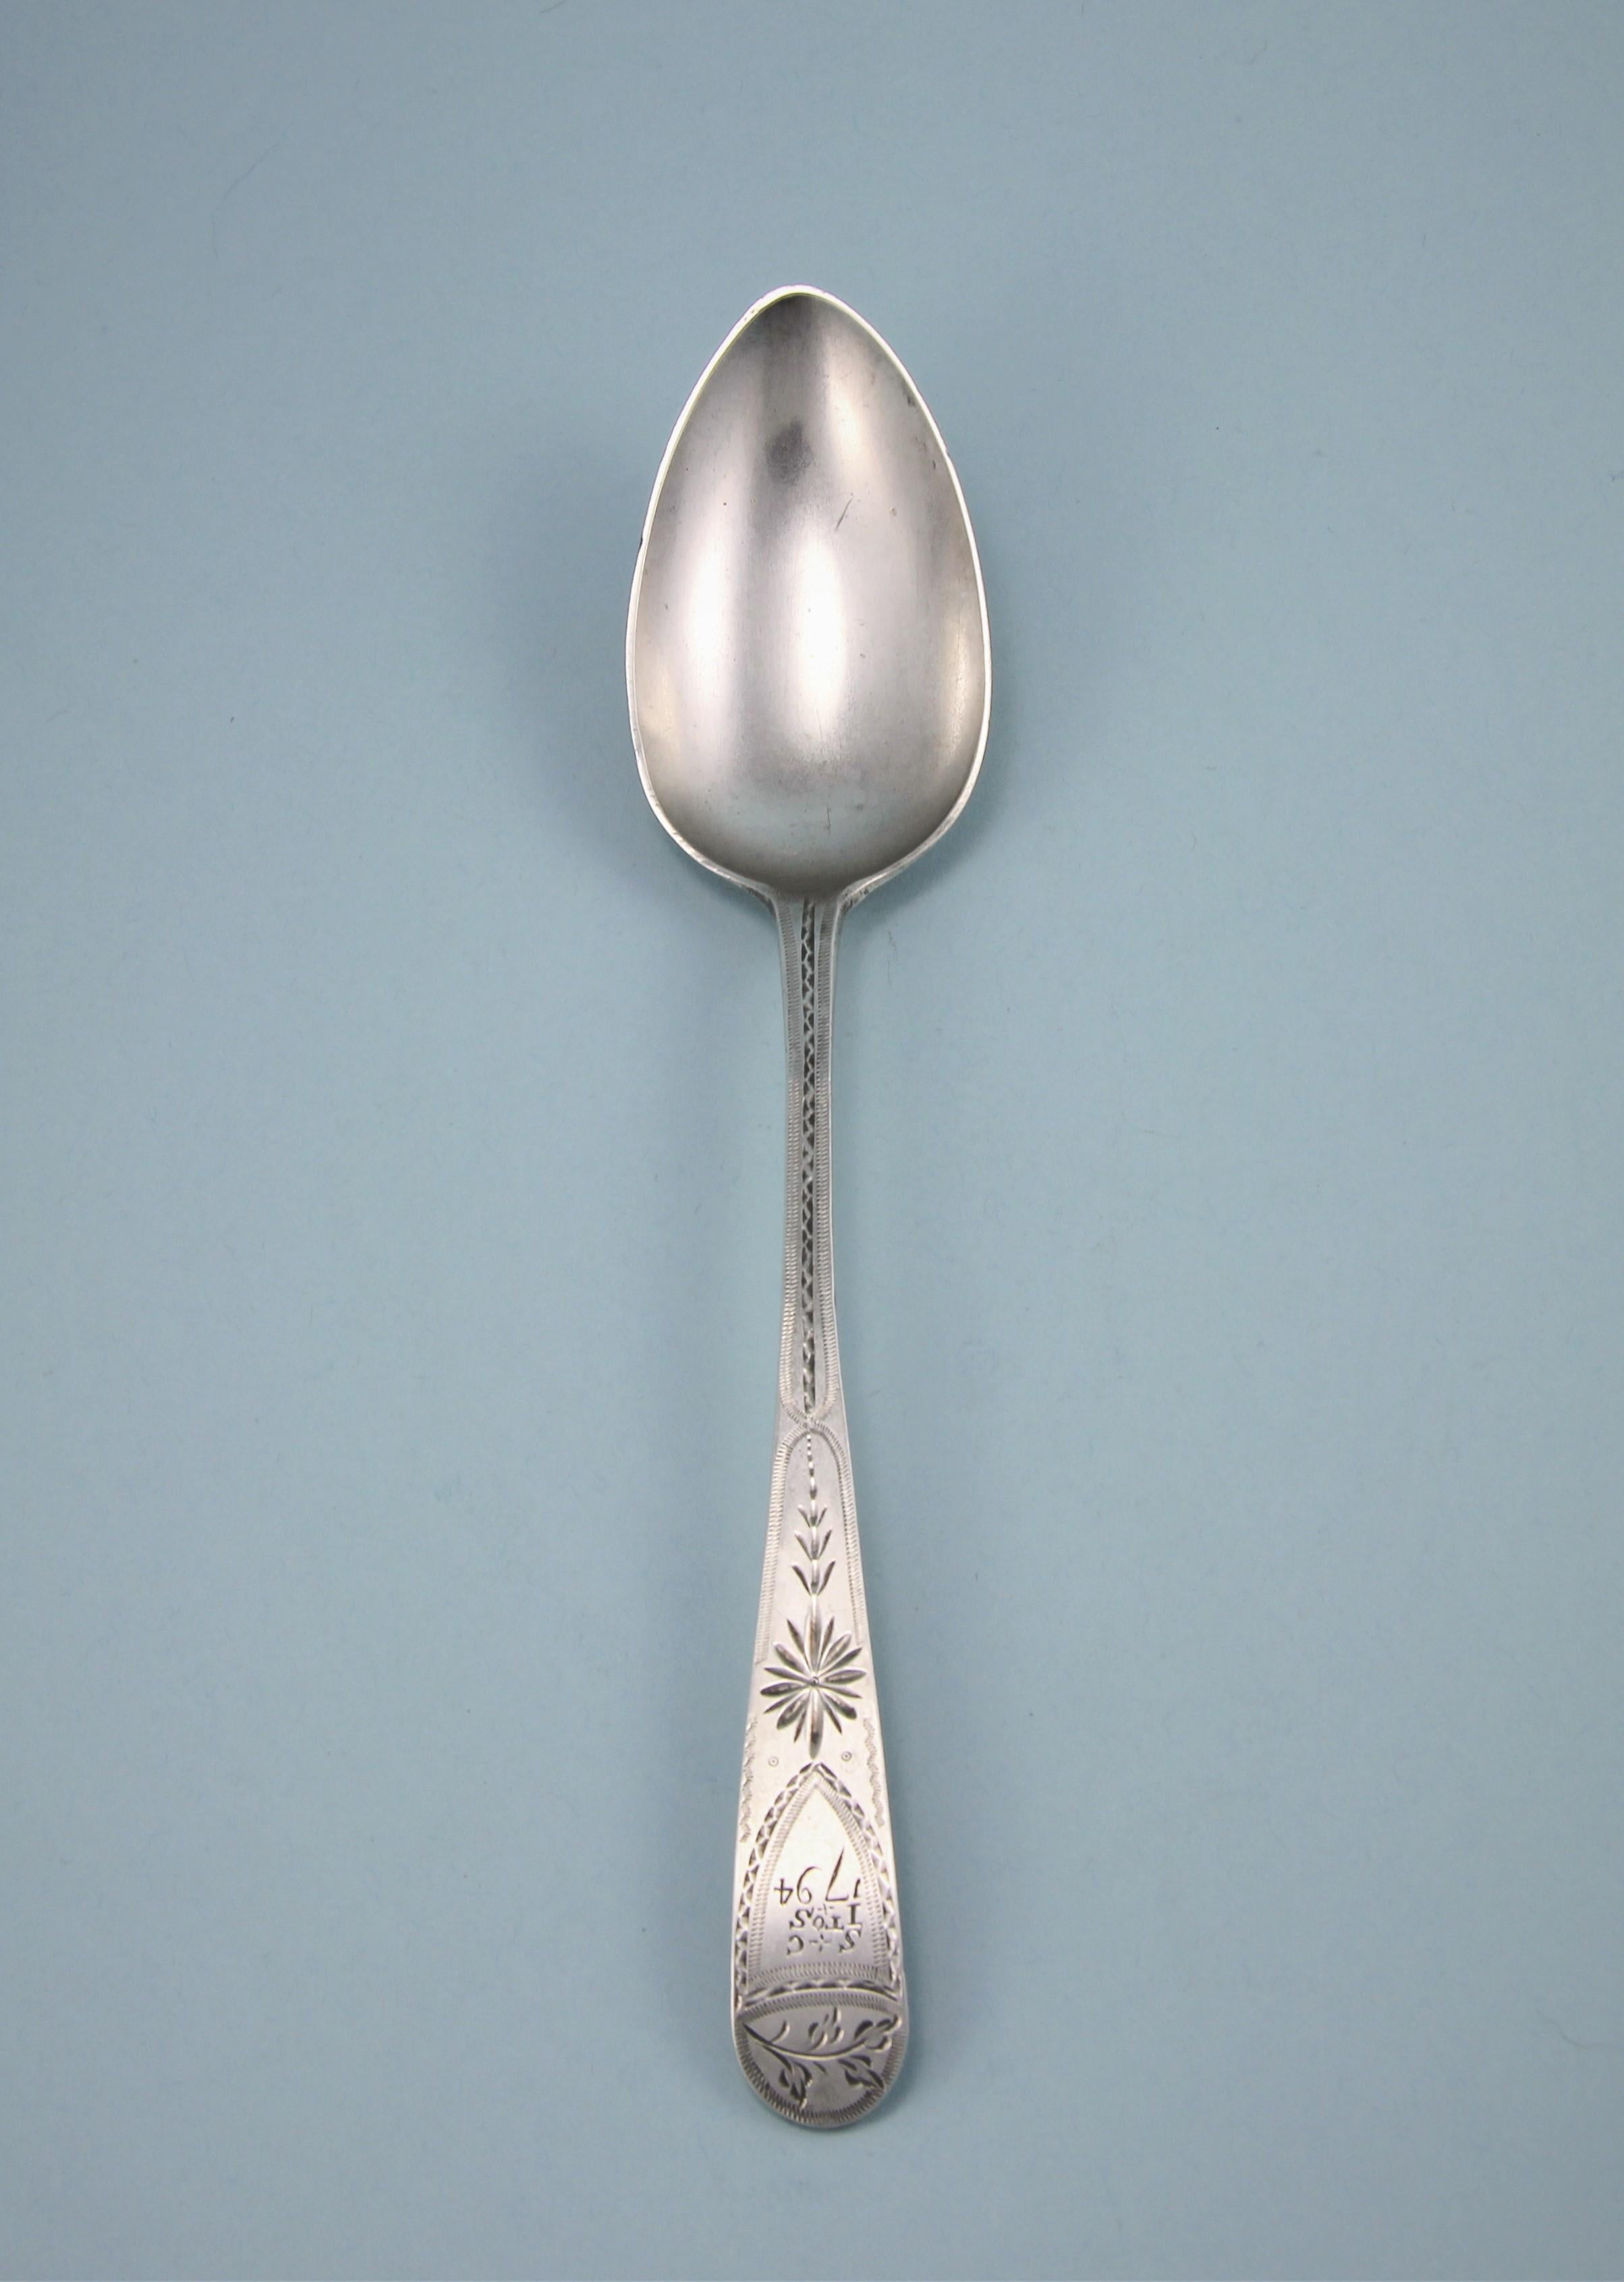 English George III Sterling Silver Bright Cut Table Spoon by Richard Ferris, Exeter For Sale